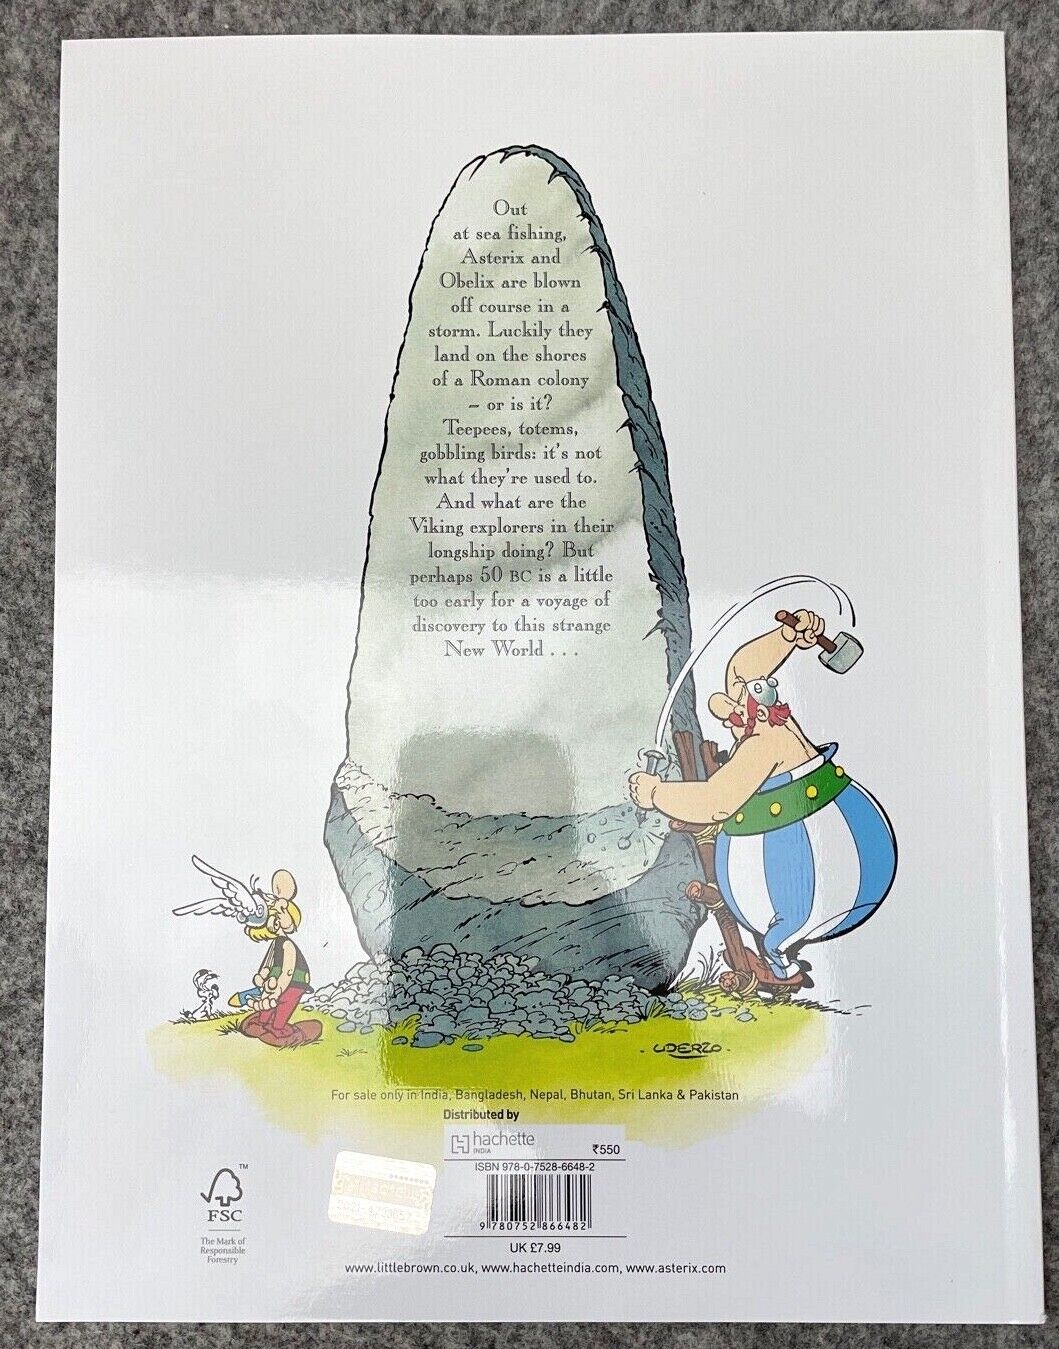 Asterix & Great Crossing - 2000s Orion/Sphere UK Edition Paperback Book EO Uderzo